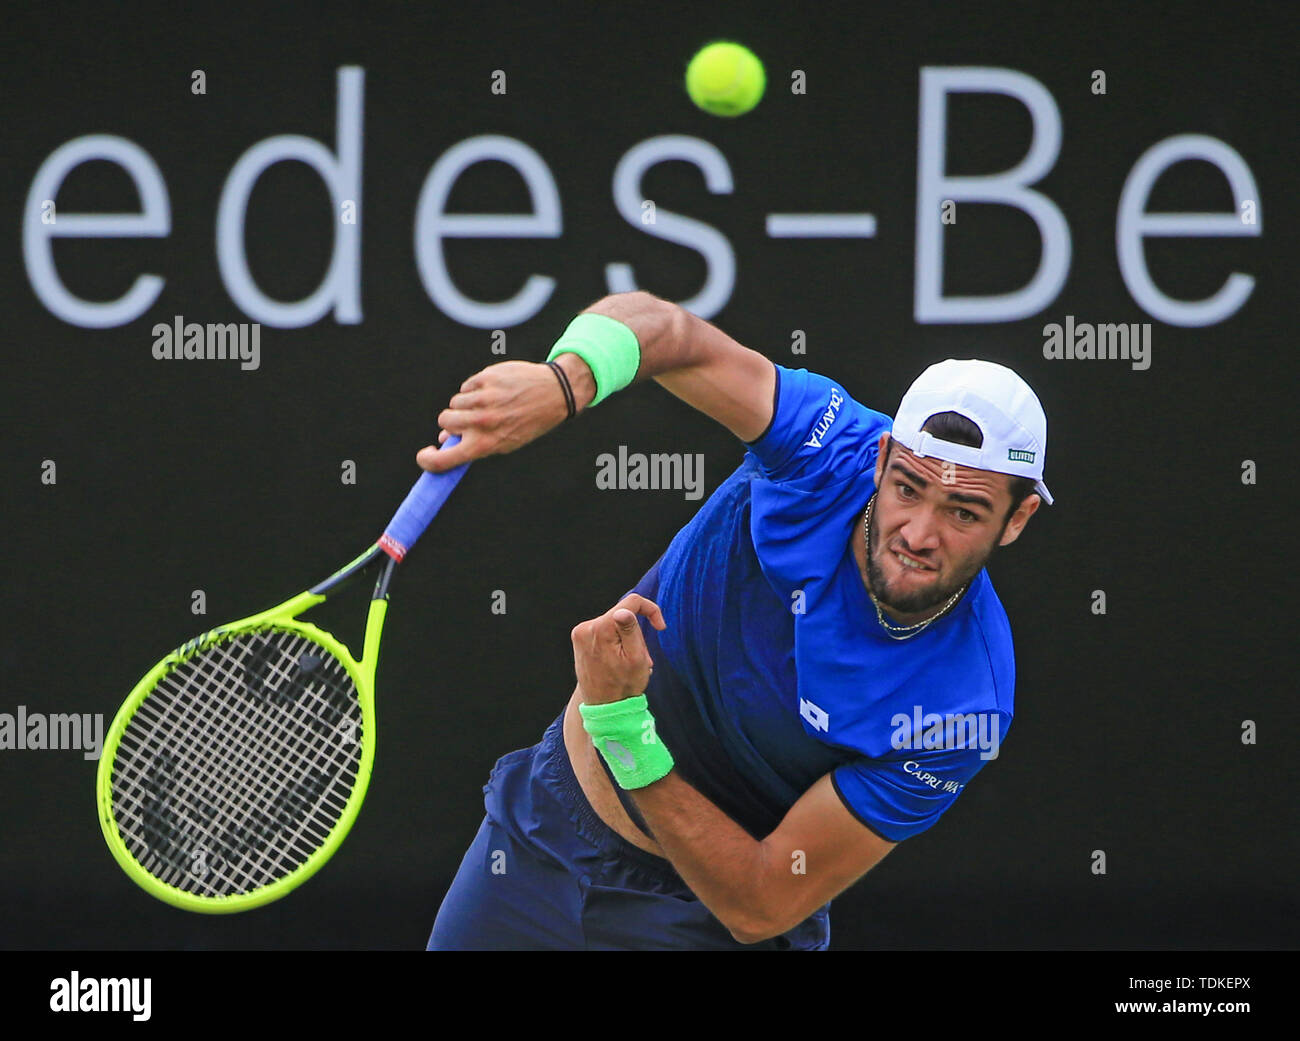 Stuttgart, Germany. 16th June, 2019. Matteo Berrettini of Italy serves  during the men's singles final match of ATP Mercedes Cup tennis tournament  between Felix Auger-Aliassime of Canada and Matteo Berrettini of Italy